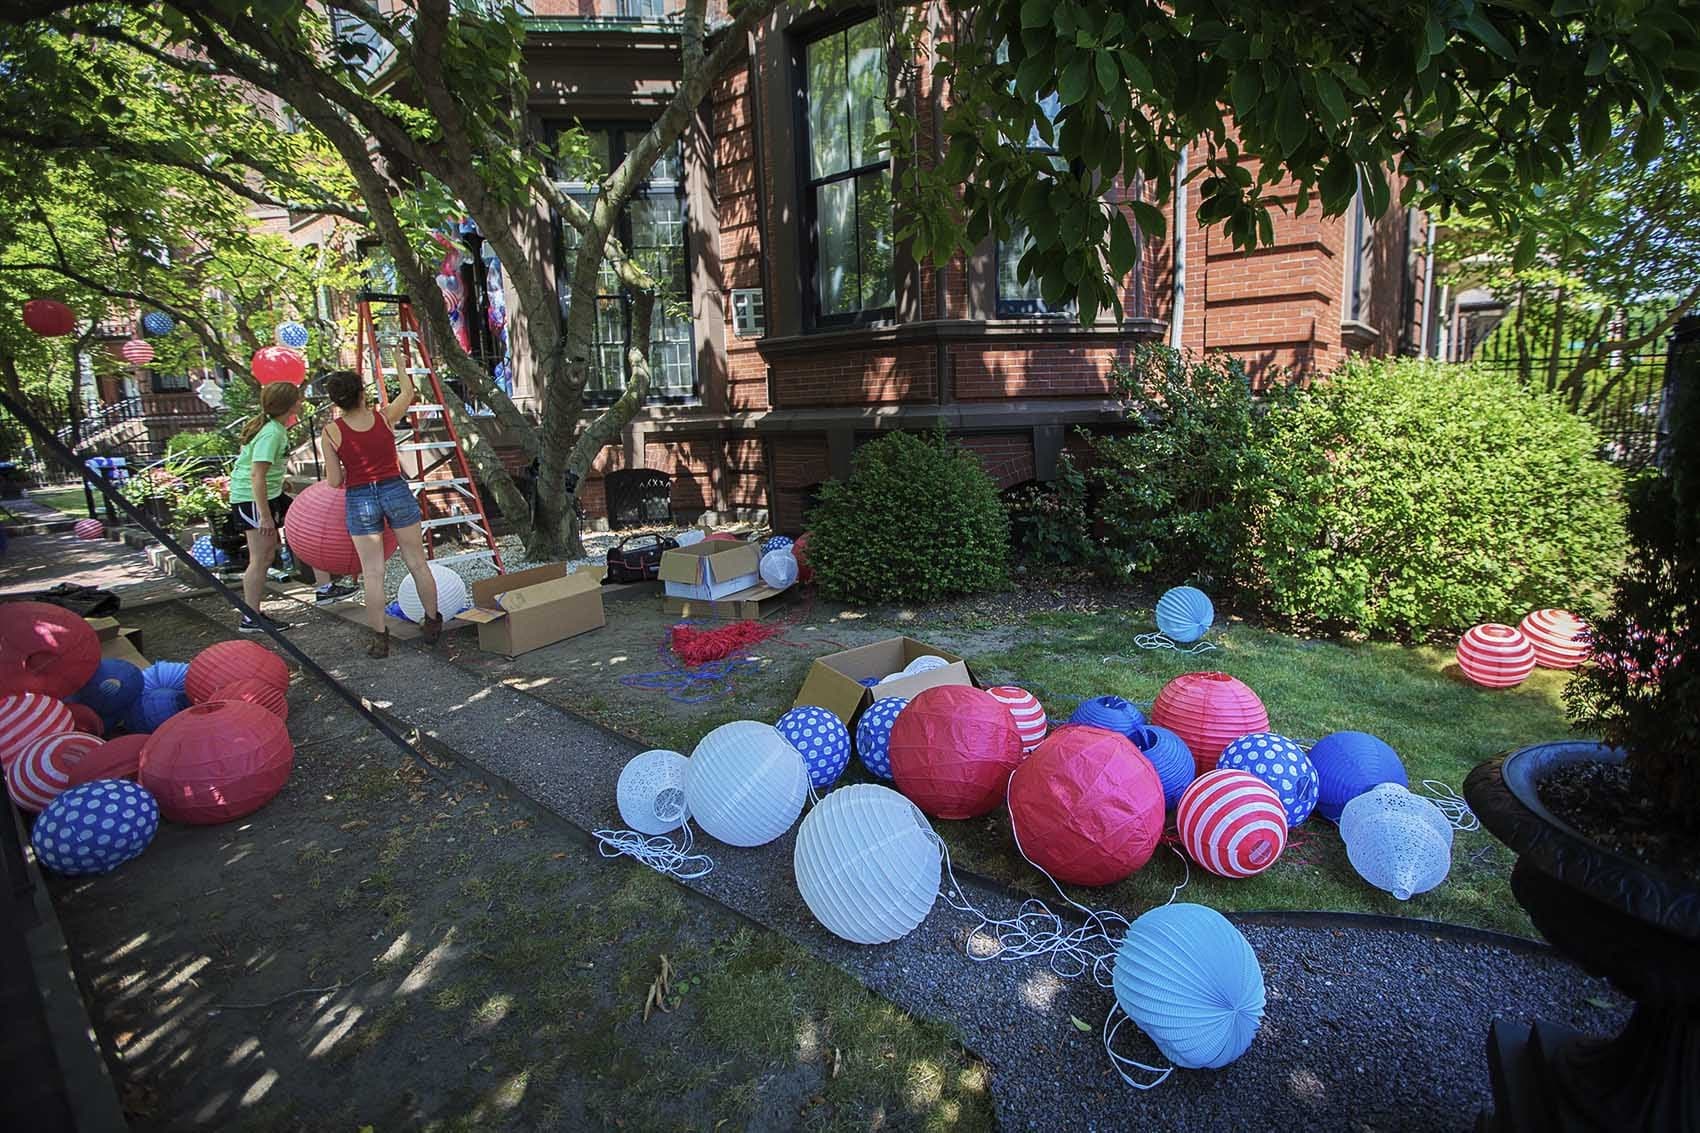 Volunteers set up red, white and blue lanterns for the French Cultural Center's annual Bastille Day celebration on Friday. (Jesse Costa/WBUR)